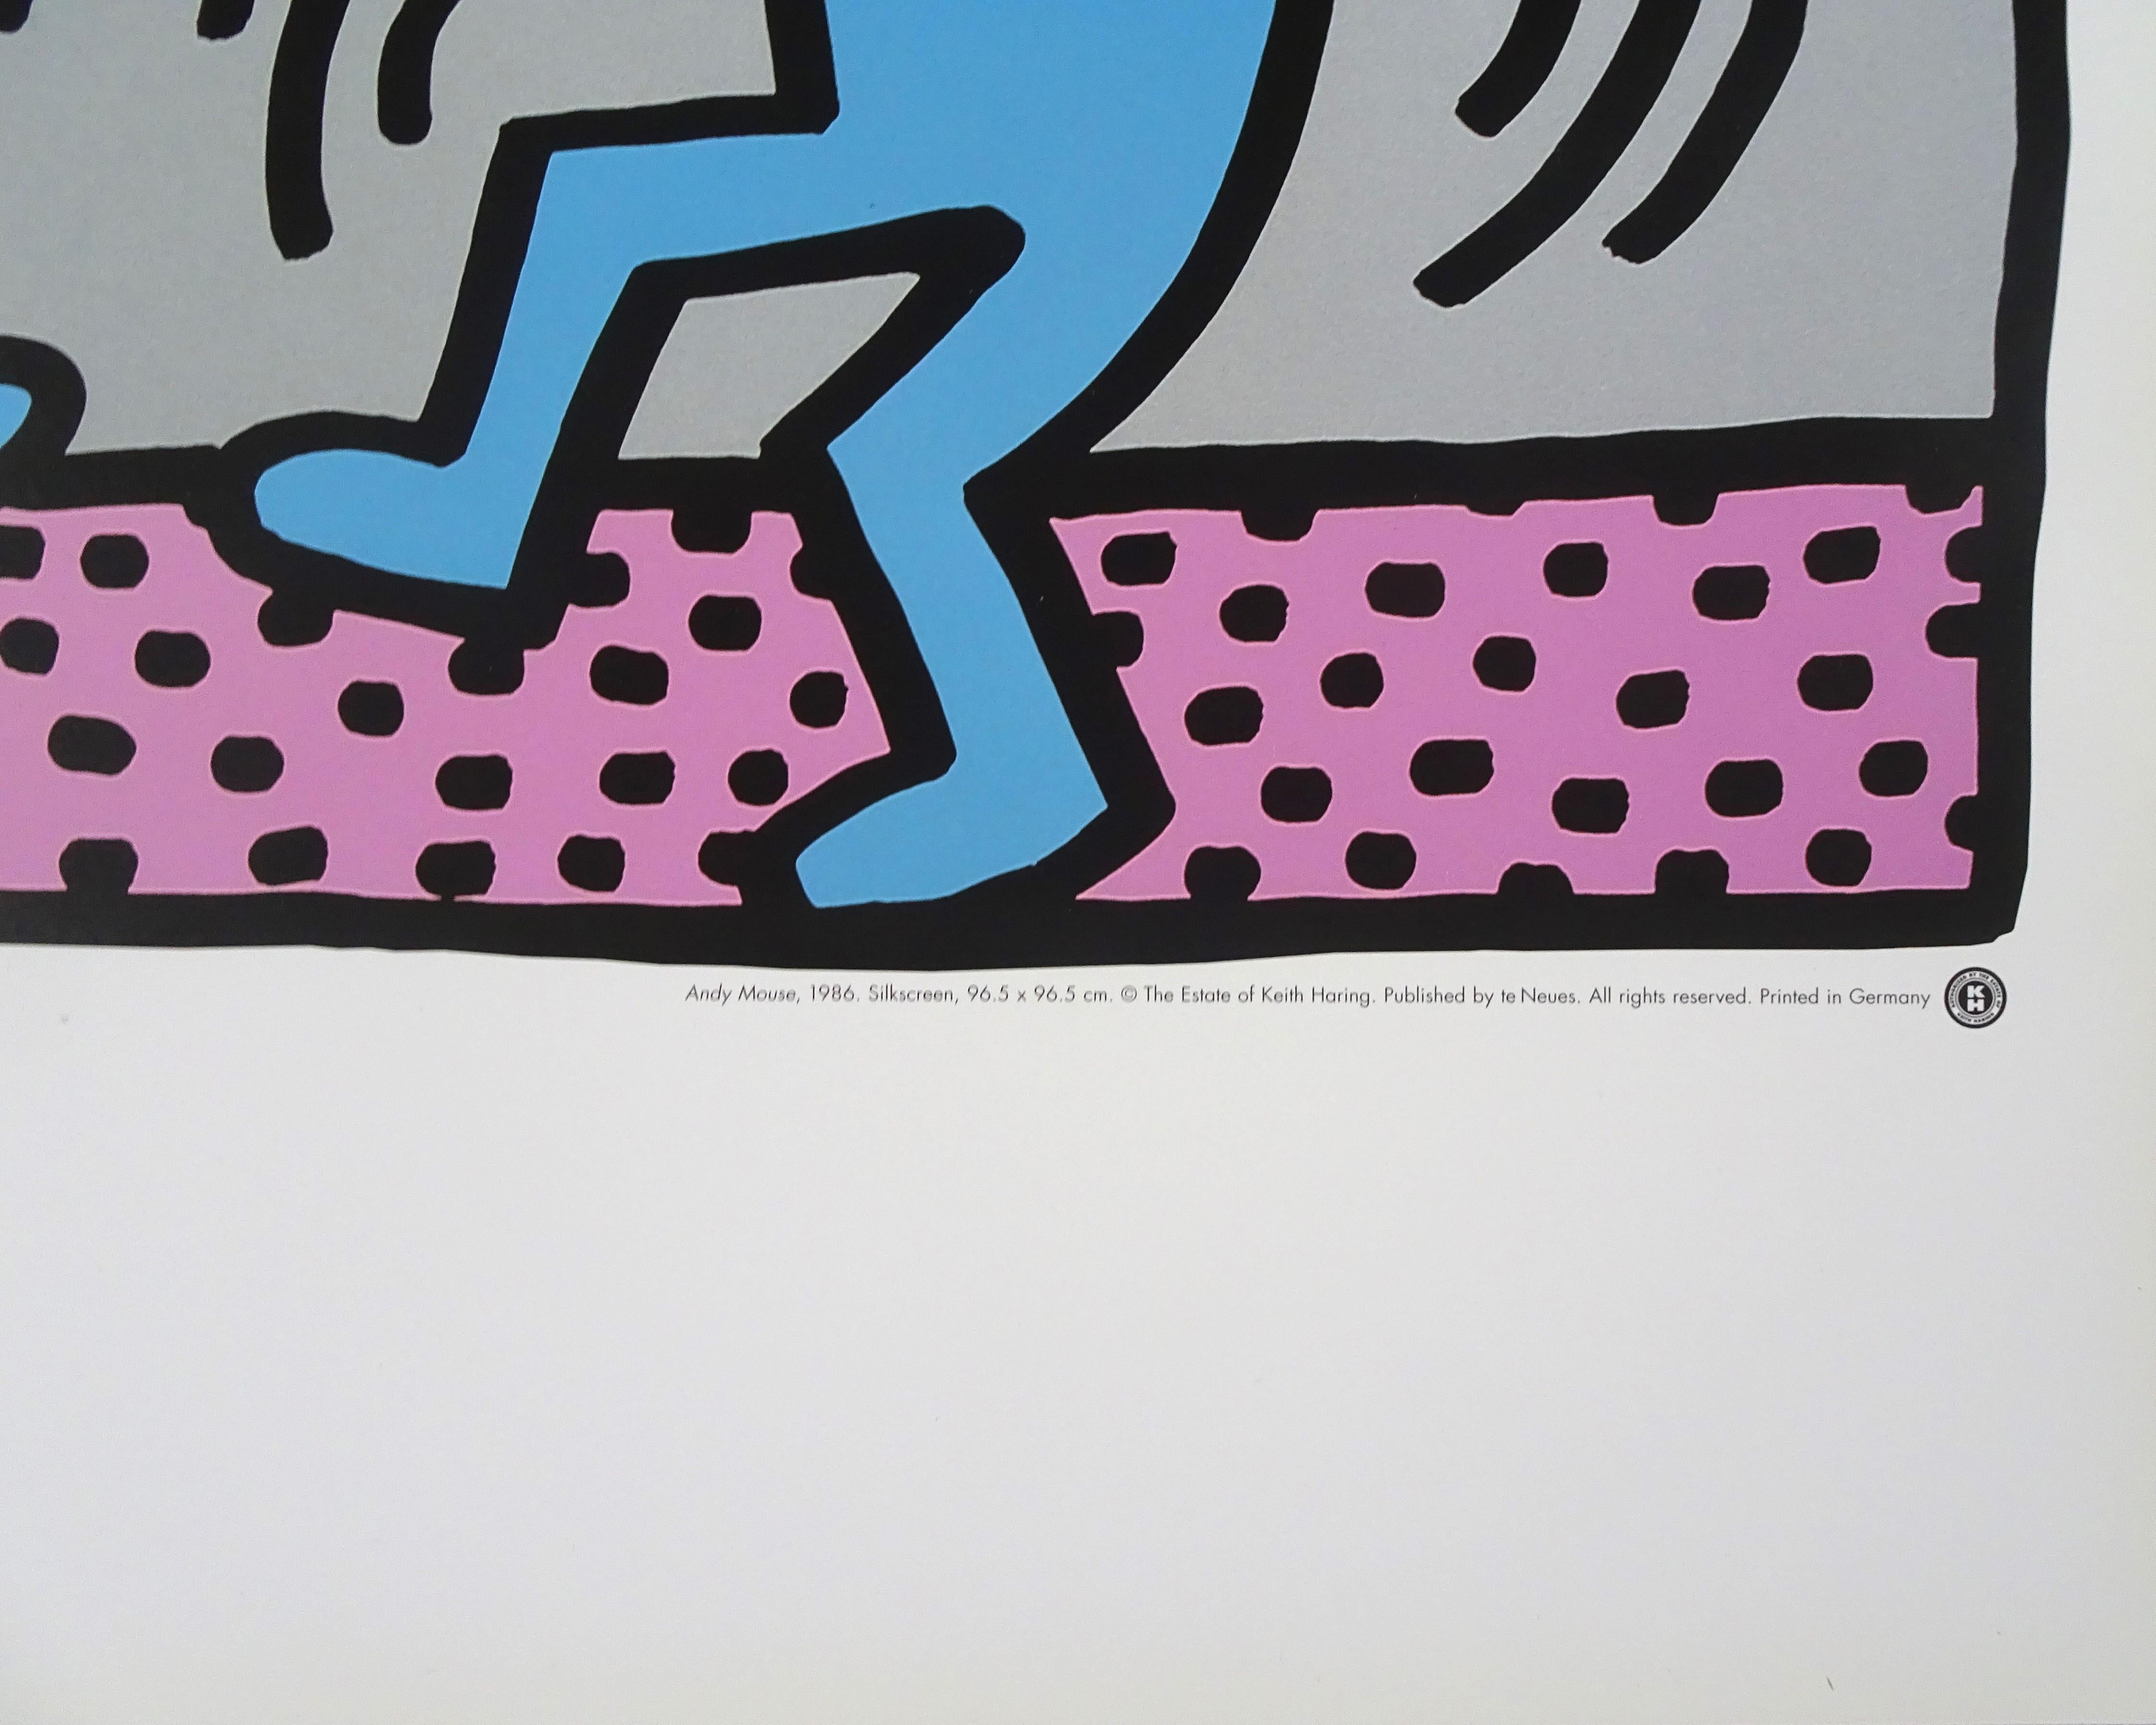 Andy Mouse - 1980s - Keith Haring - Offset - Contemporary 1